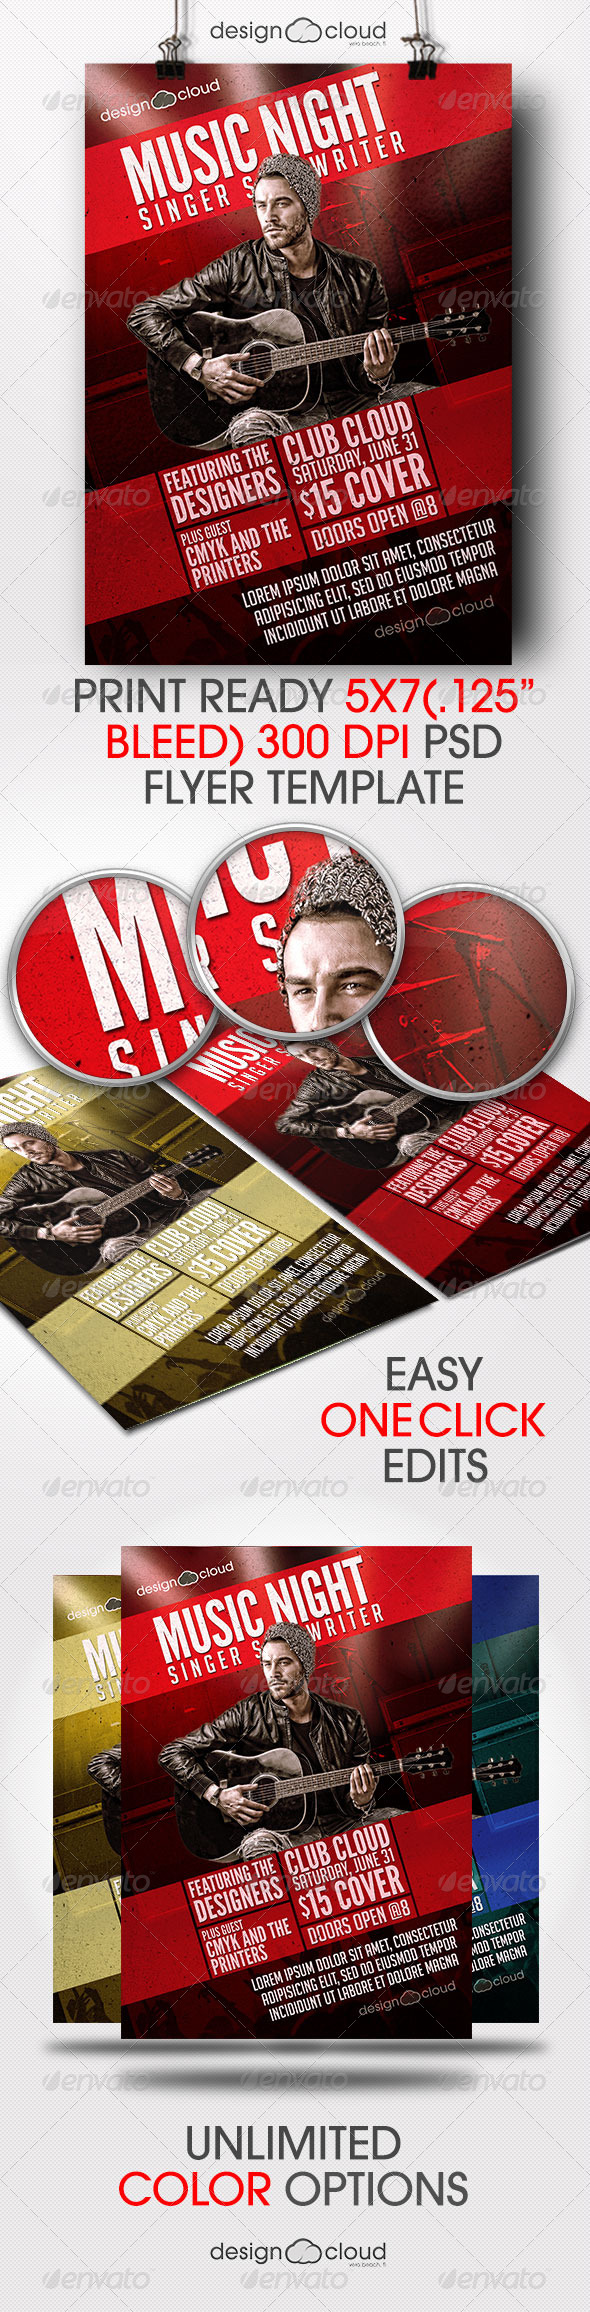 GraphicRiver Singer Songwriter Music Night Flyer Template 7681895